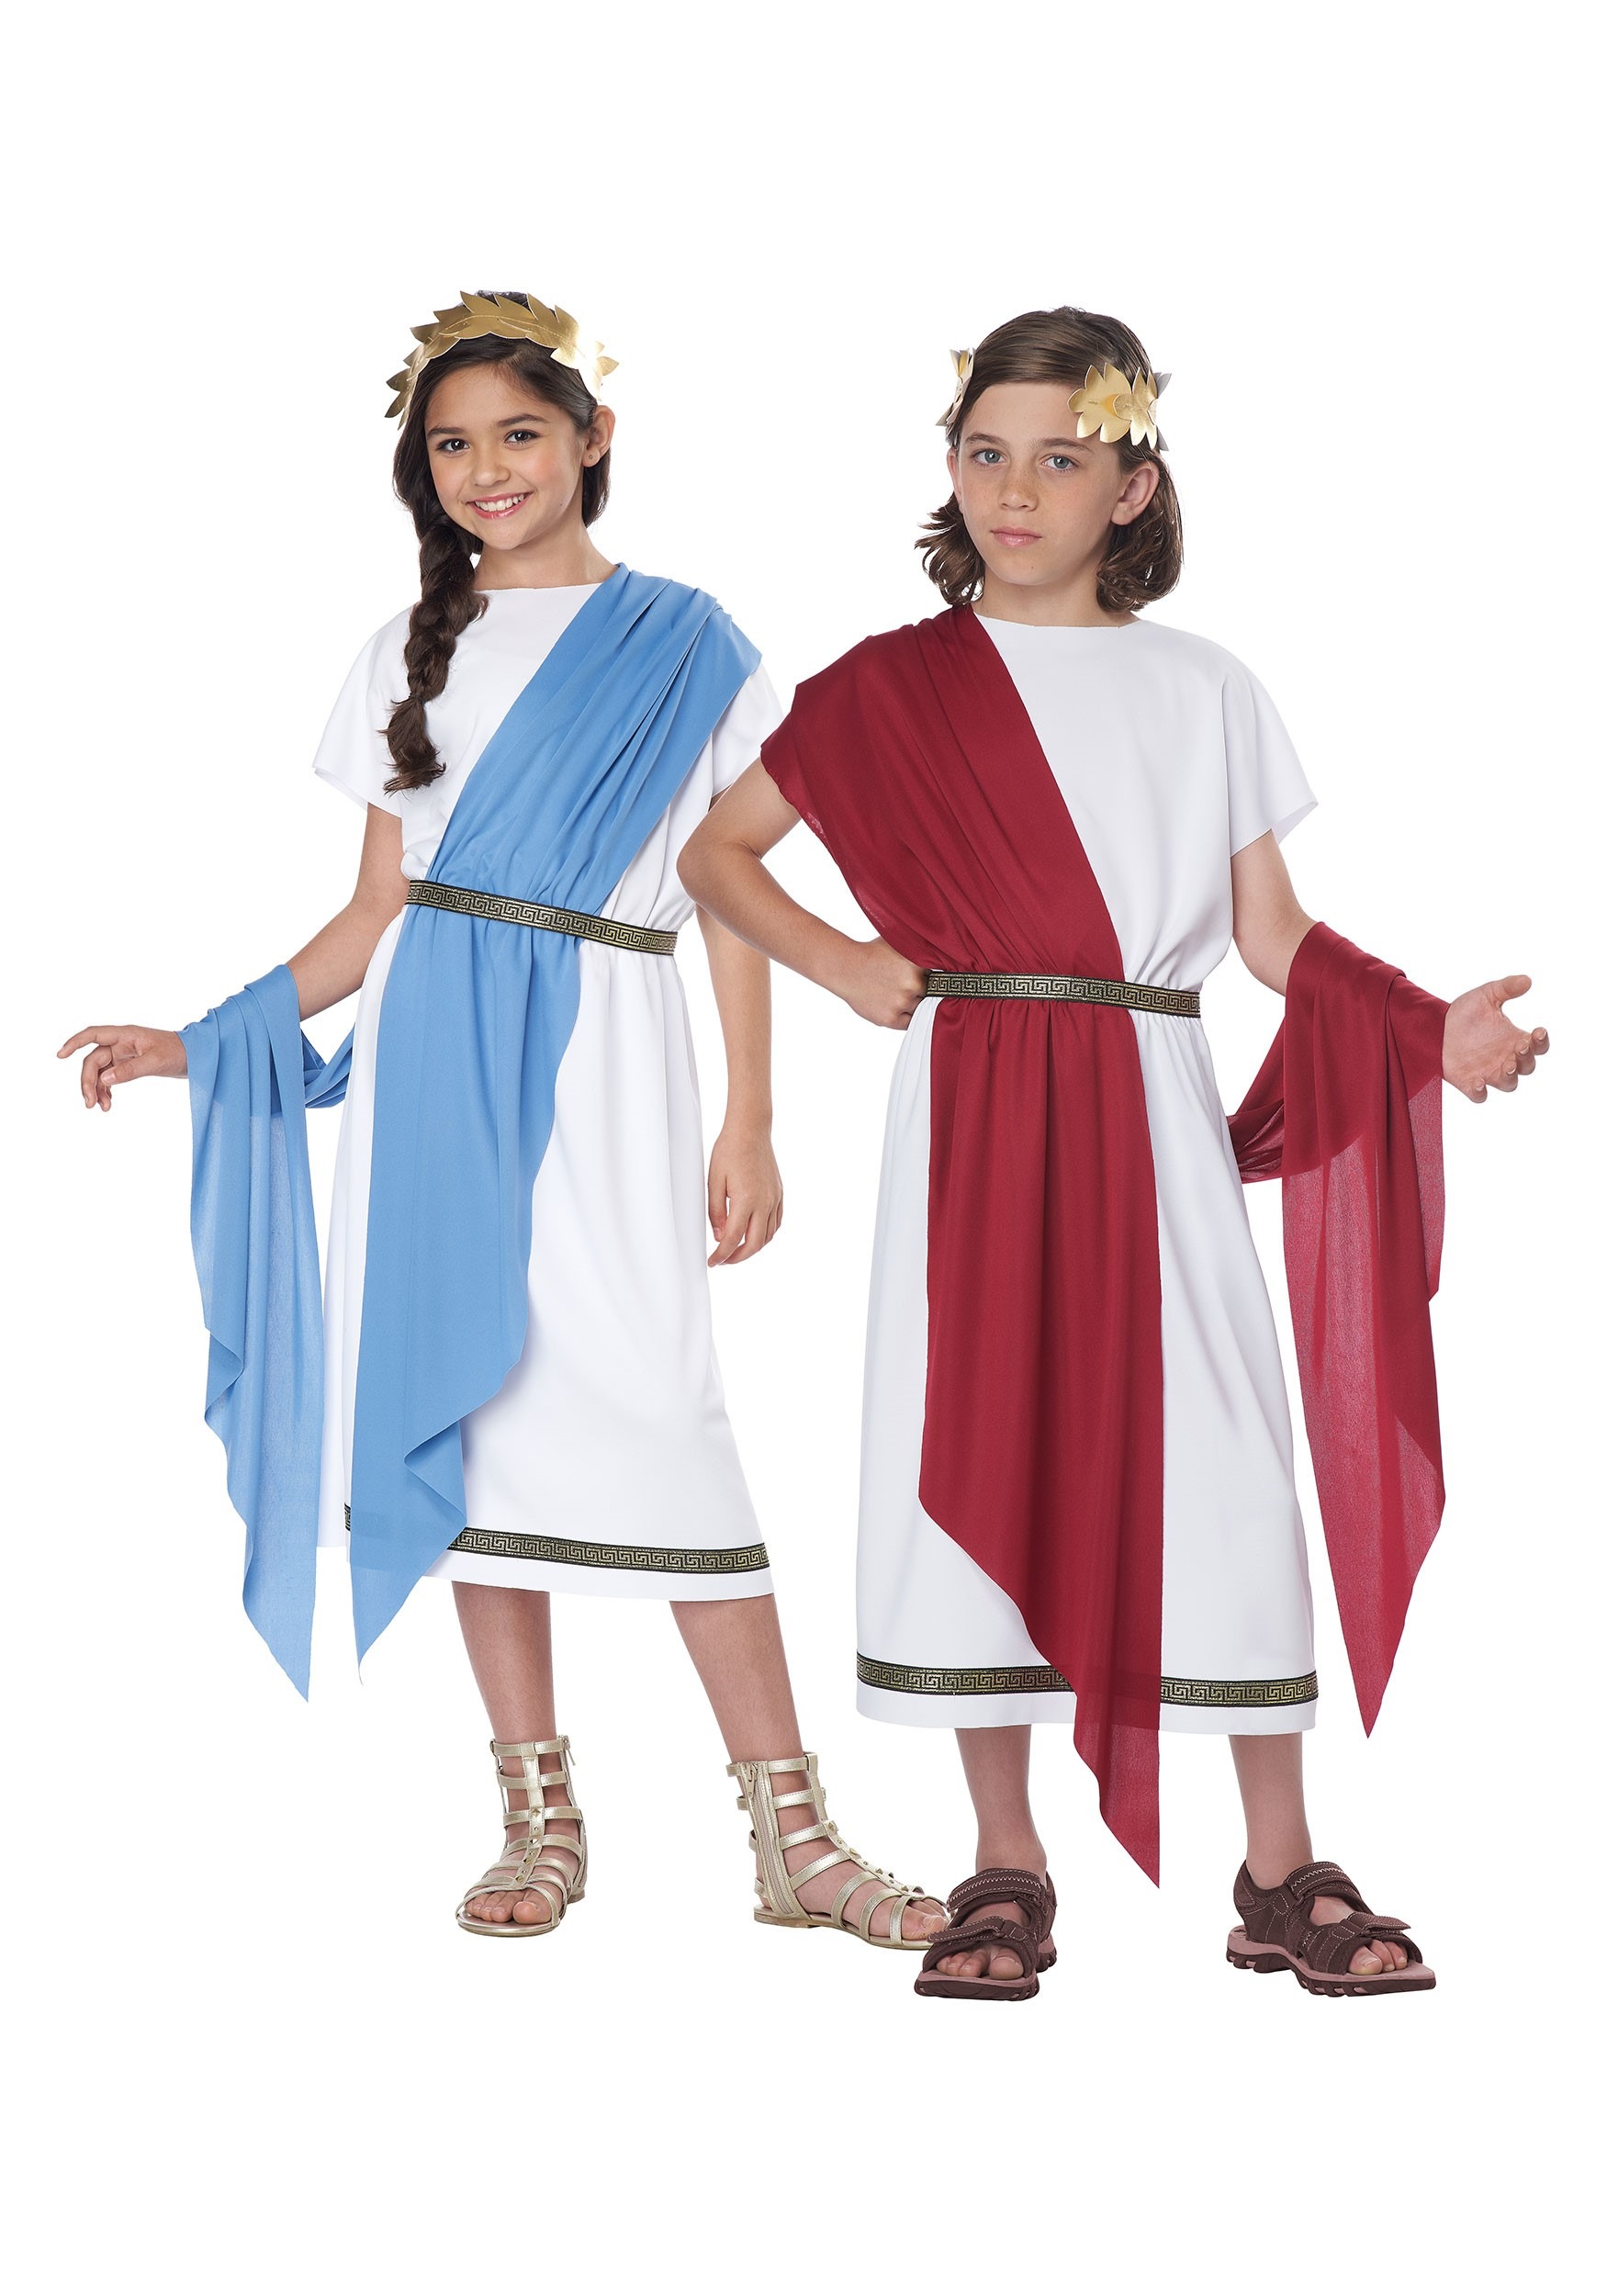 Photos - Fancy Dress California Costume Collection Party Toga Child Costume Red/Blue/Wh 